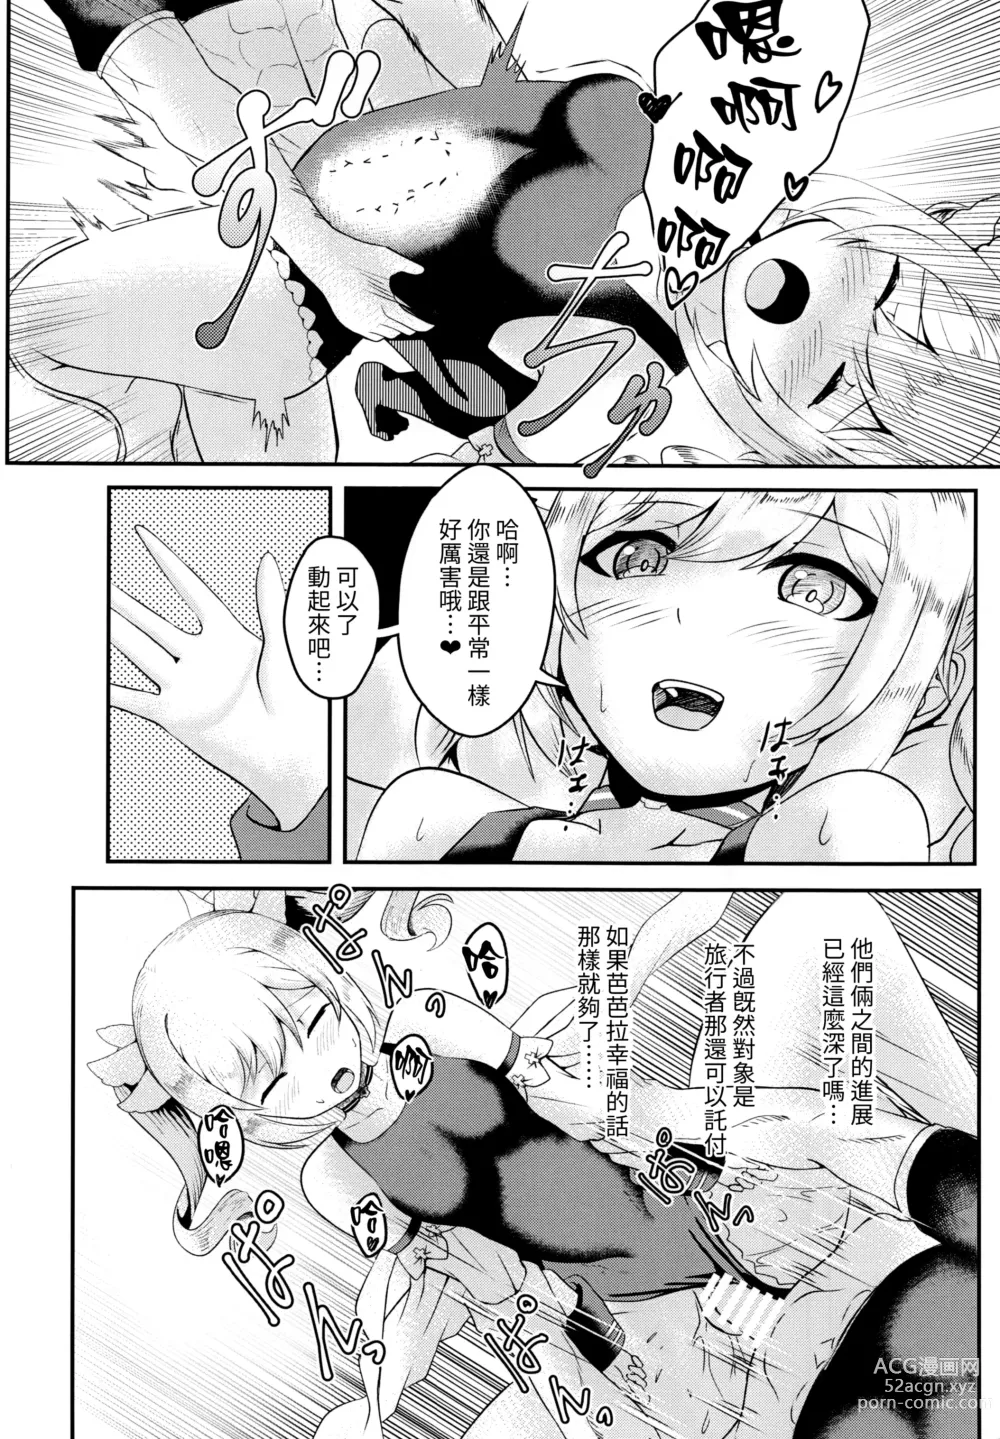 Page 11 of doujinshi sisterlty love